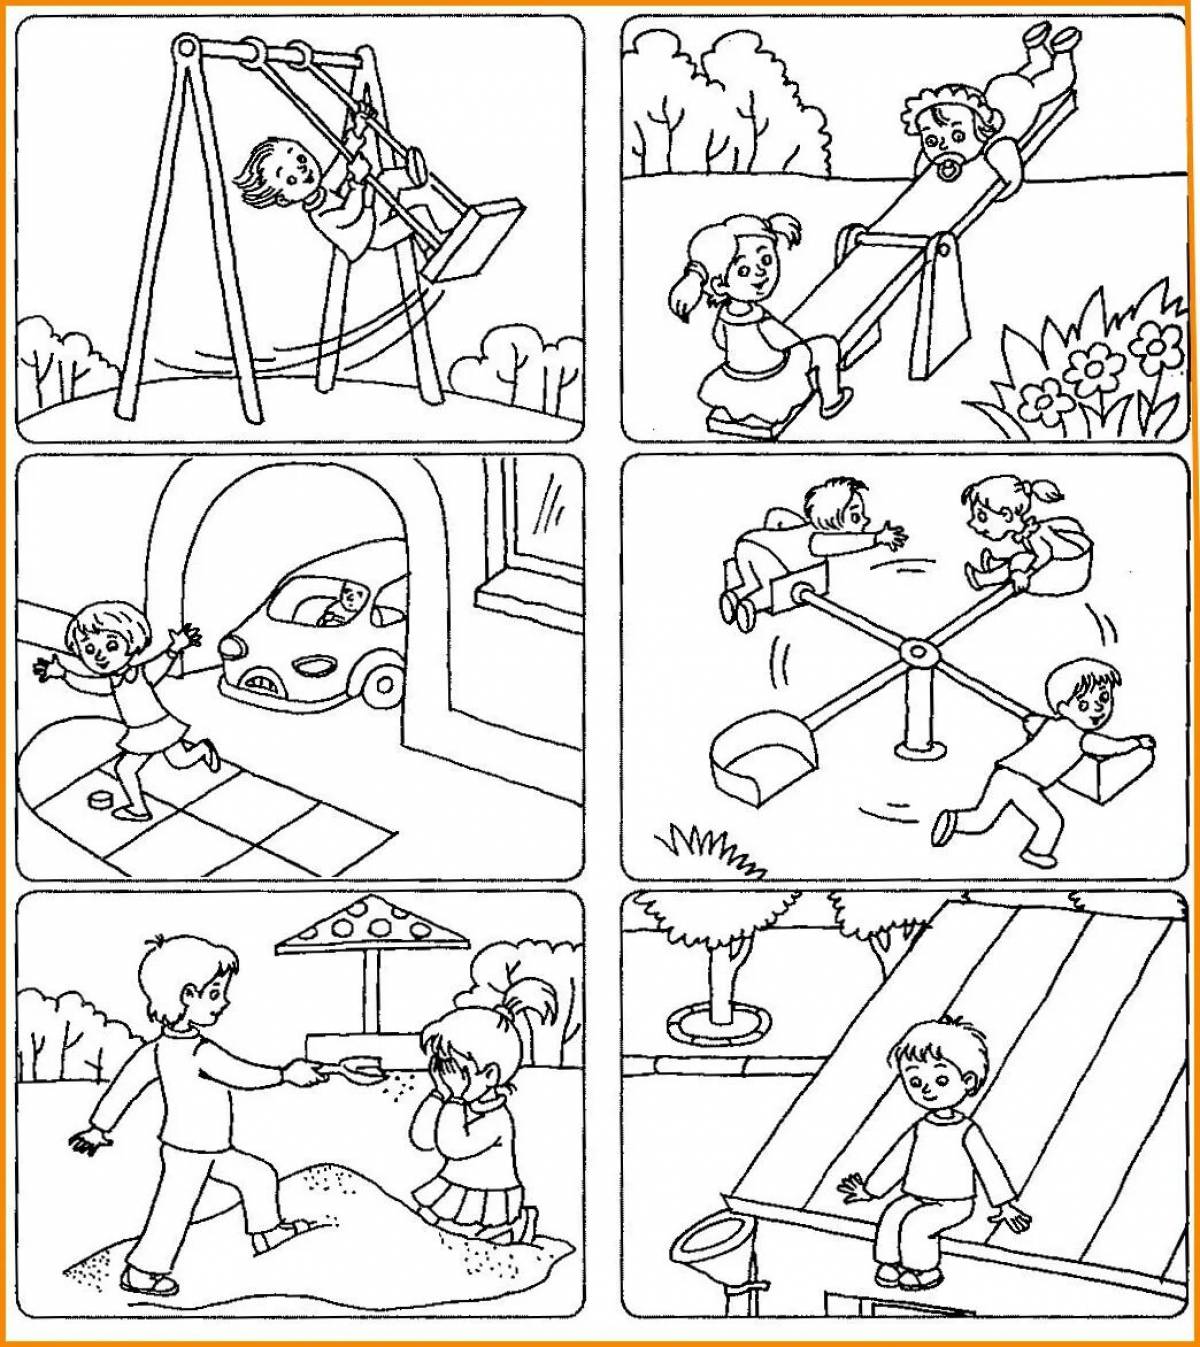 Incentive safety coloring page for juniors